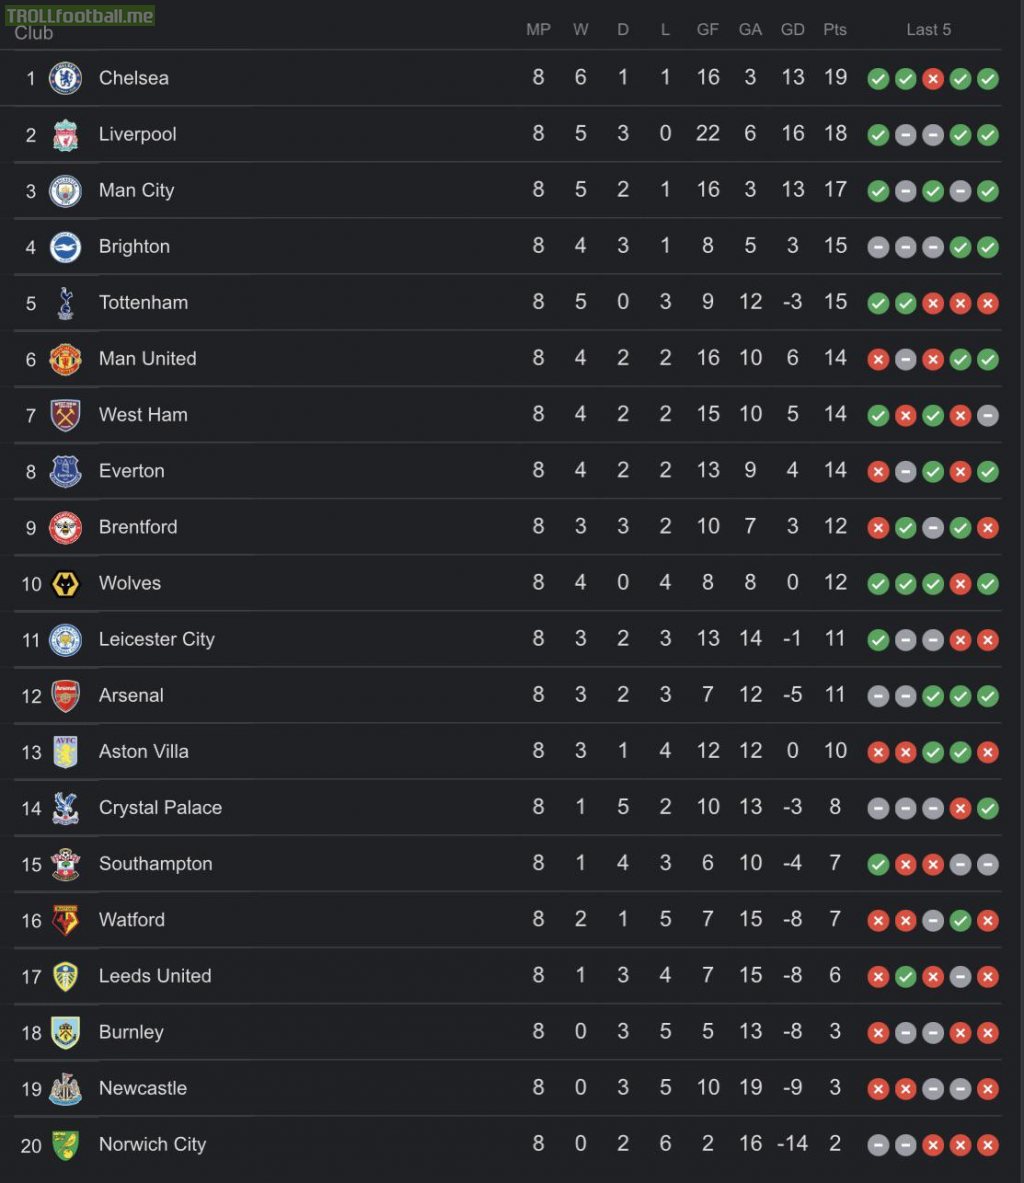 The Premier League table after Match-day 8 has elapsed. The big six all at the top of the league minus Arsenal, with Norwich, Burnley and Newly acquired Saudi backed Newcastle still fighting for their first win of the season. Brighton in fourth and newly promoted Brentford in 9th with 12 points.